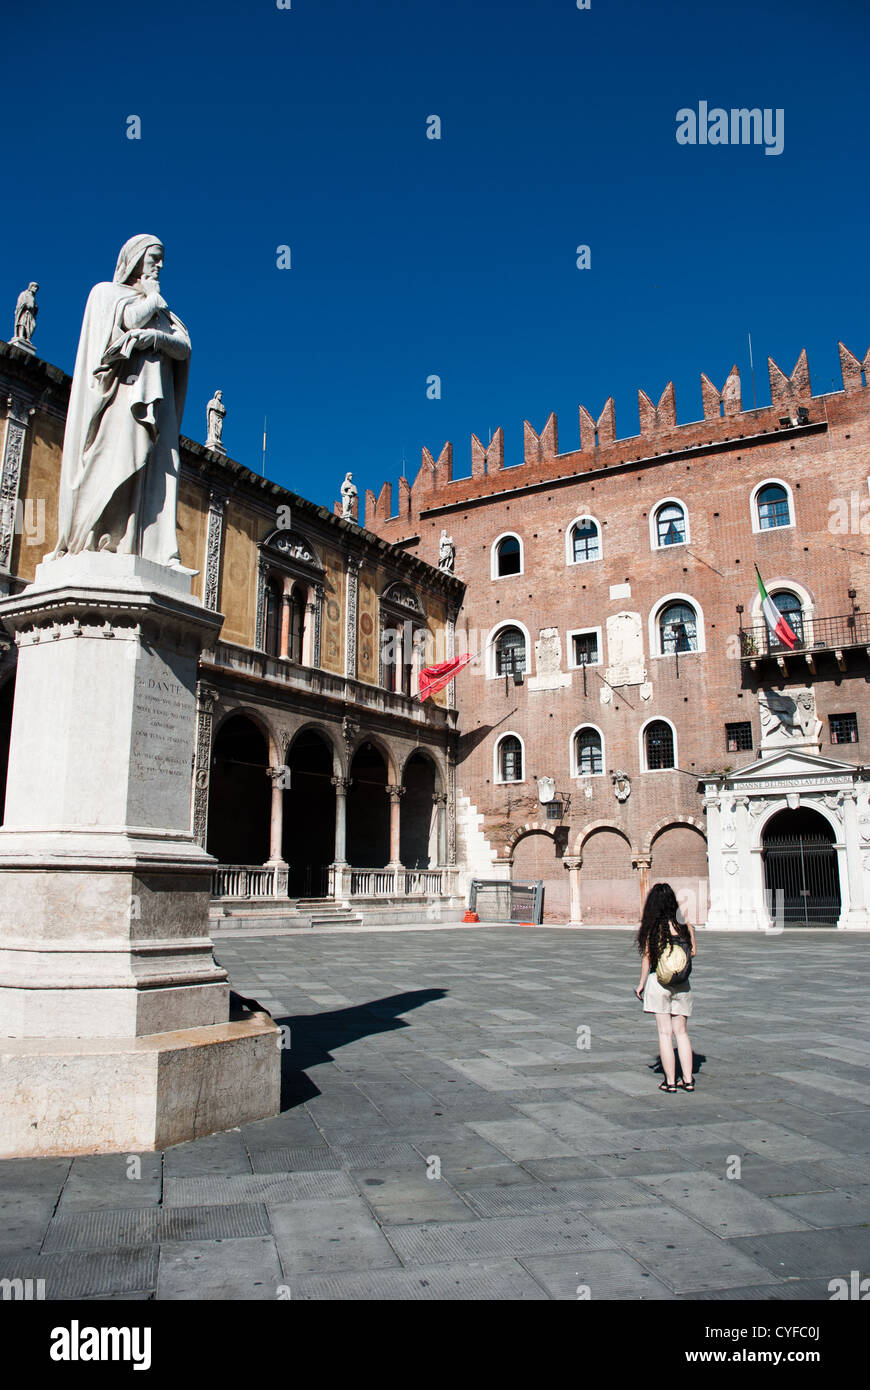 Piazza dei Signori, also known as Piazza Dante in Verona with various palaces around the square and a statue of Dante Alighieri Stock Photo